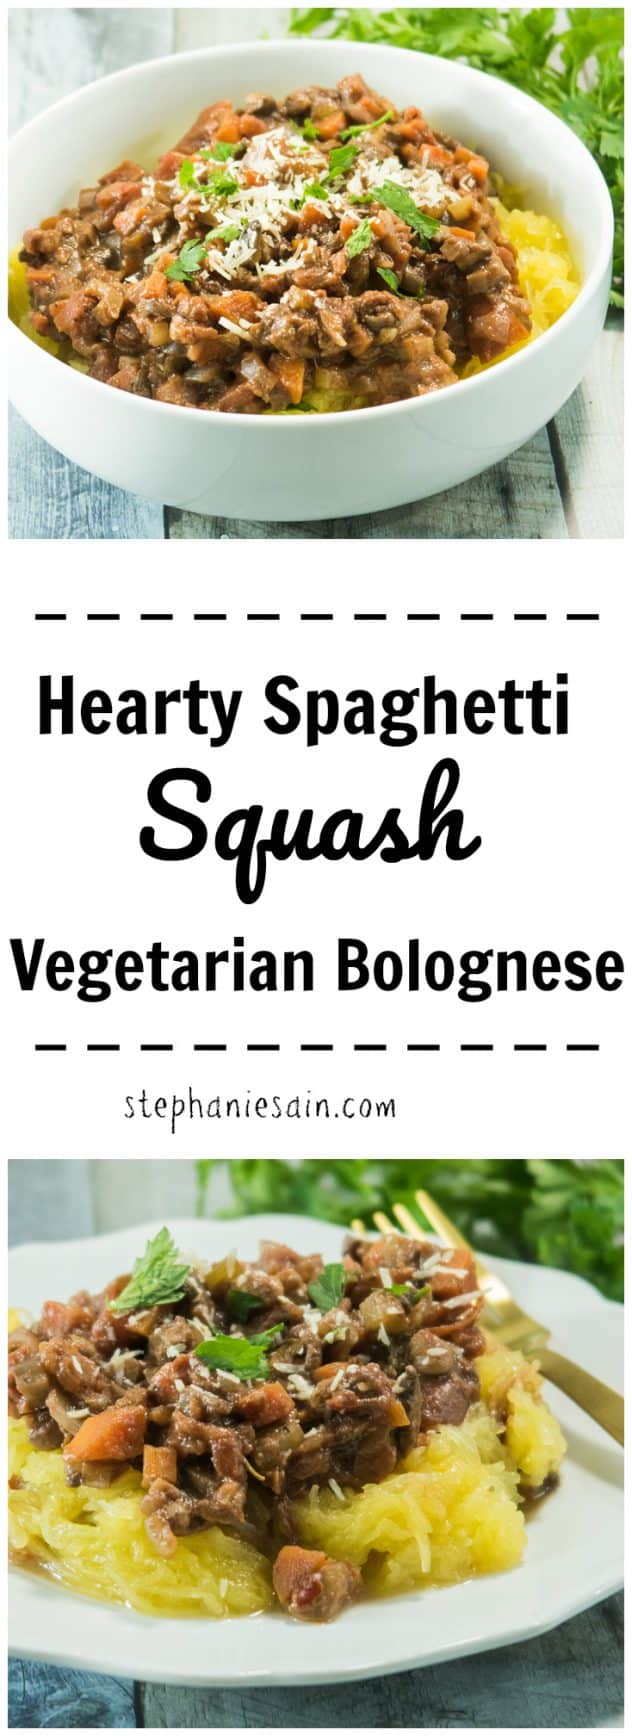 This Hearty Spaghetti Squash Vegetarian Bolognese is chocked full of onions, carrots, celery, & mushrooms. A tasty, filling meal that is perfect for any night of the week. Gluten free & Vegetarian.